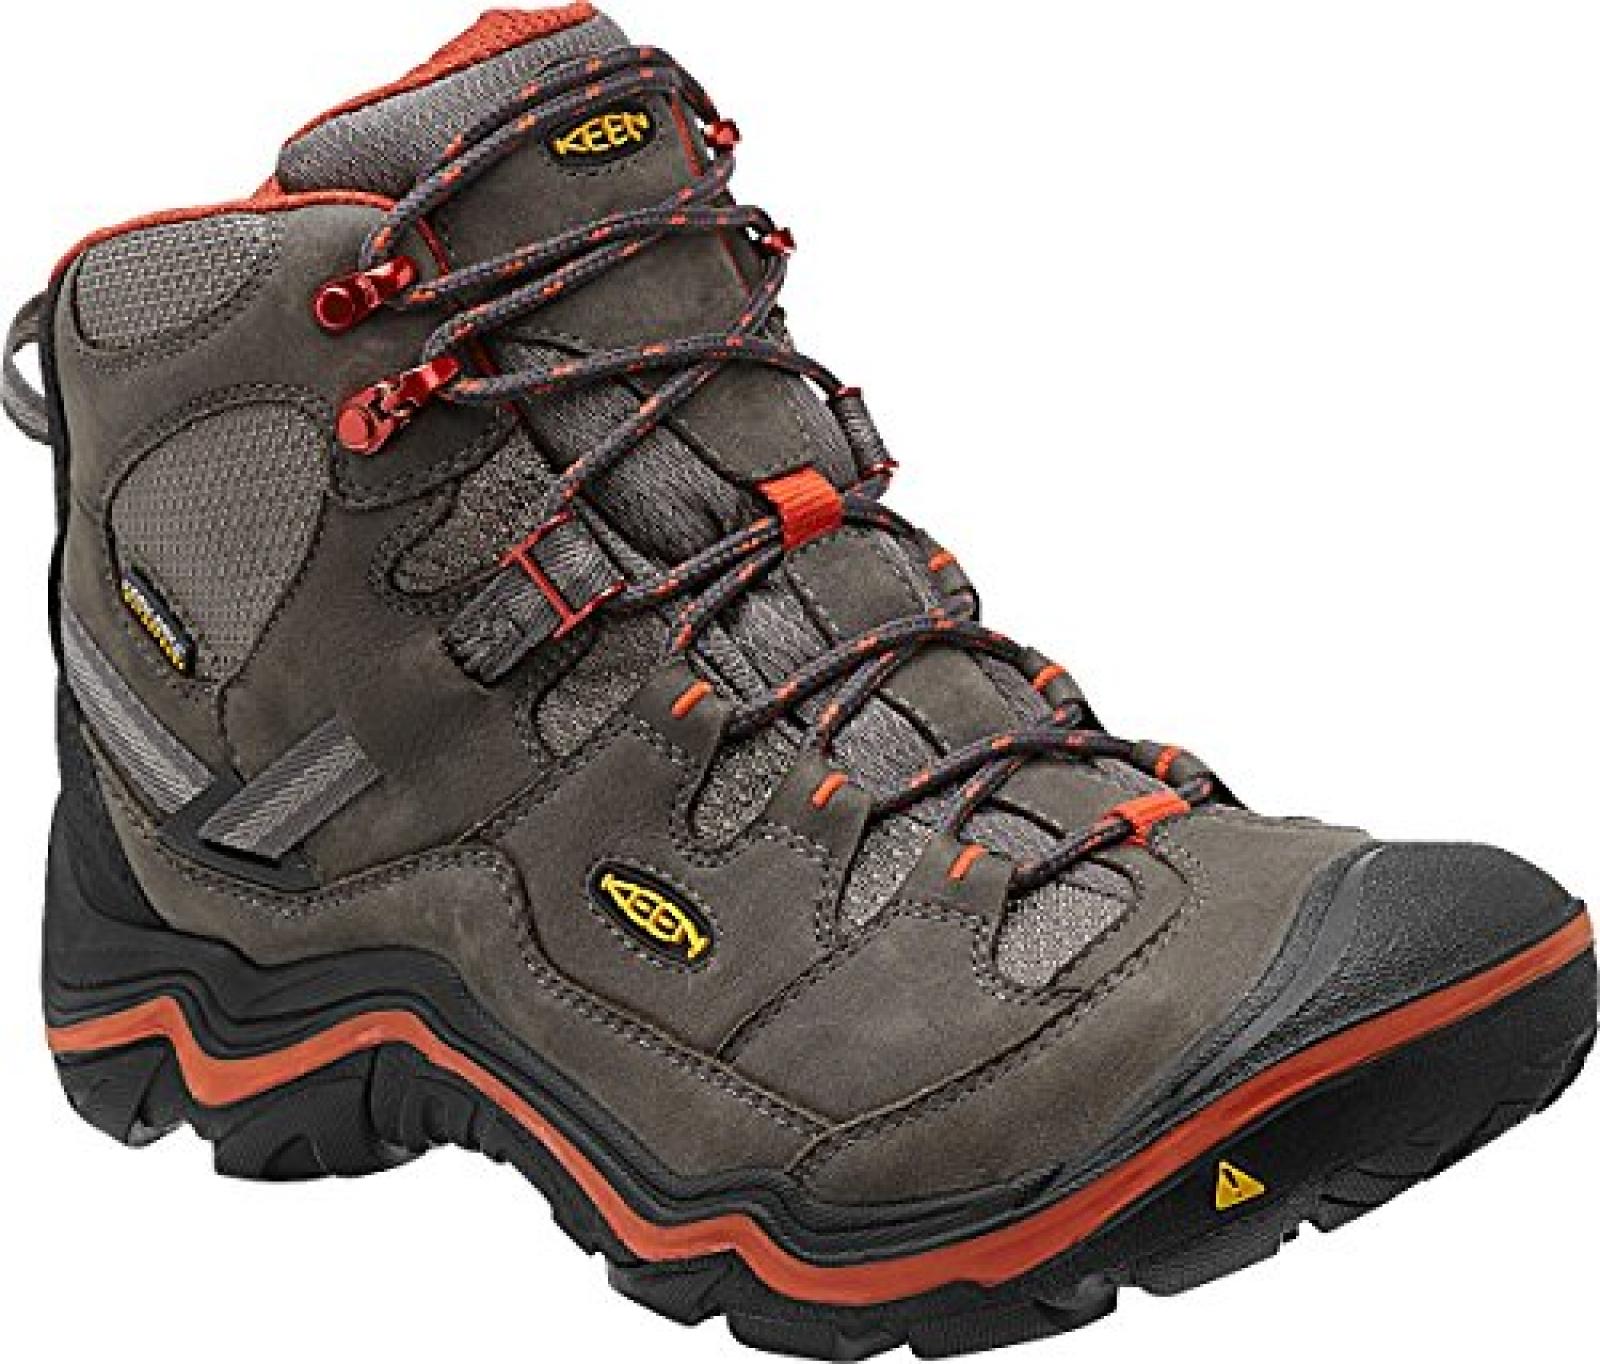 Keen Durand Mid WP Wandern Stiefel - AW14 